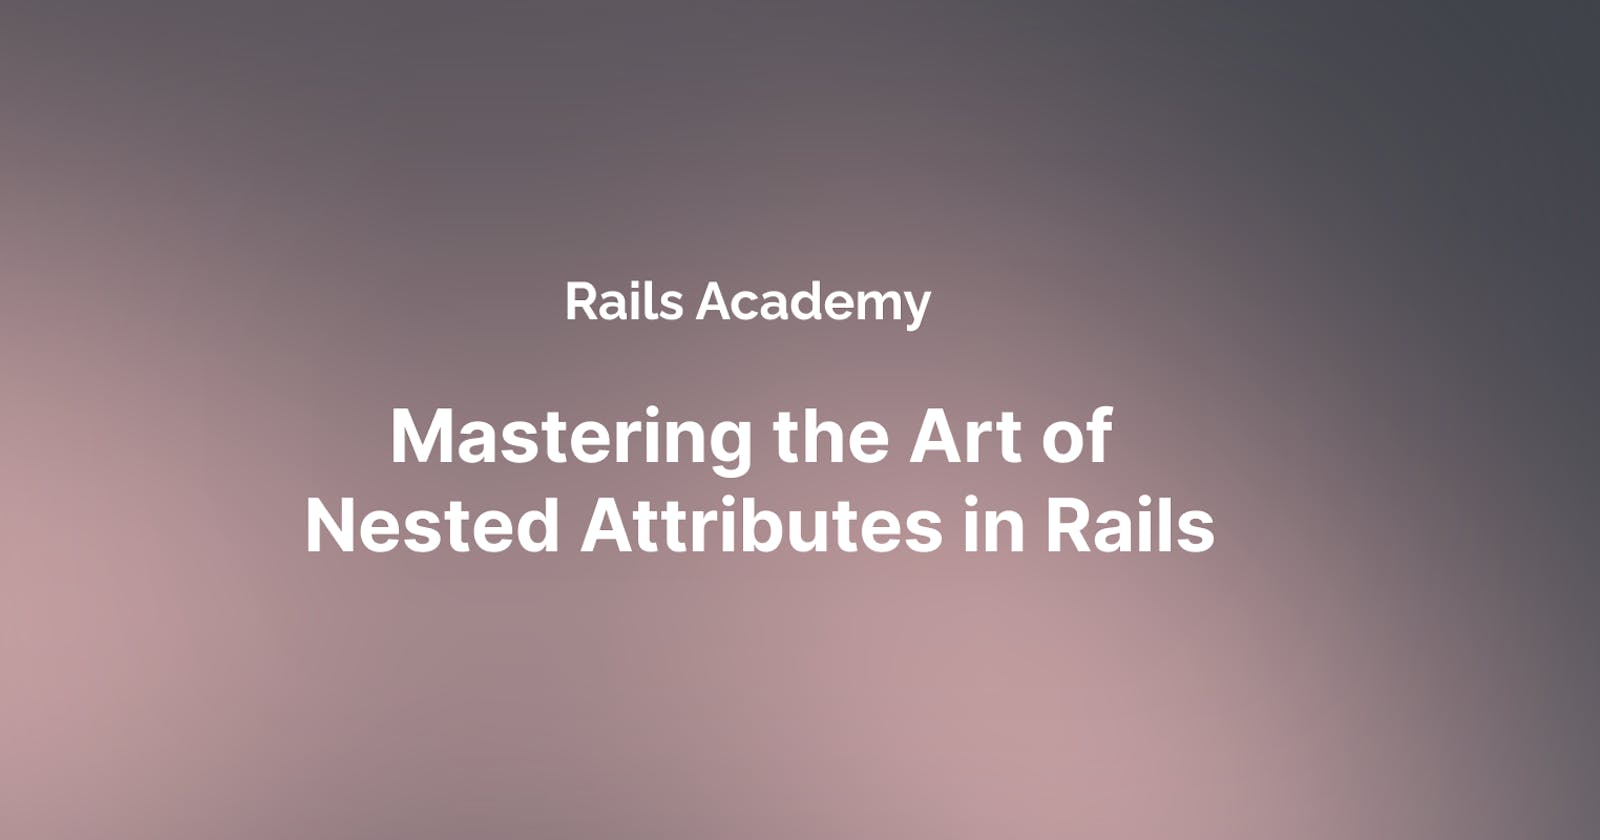 Mastering the Art of Nested Attributes in Rails